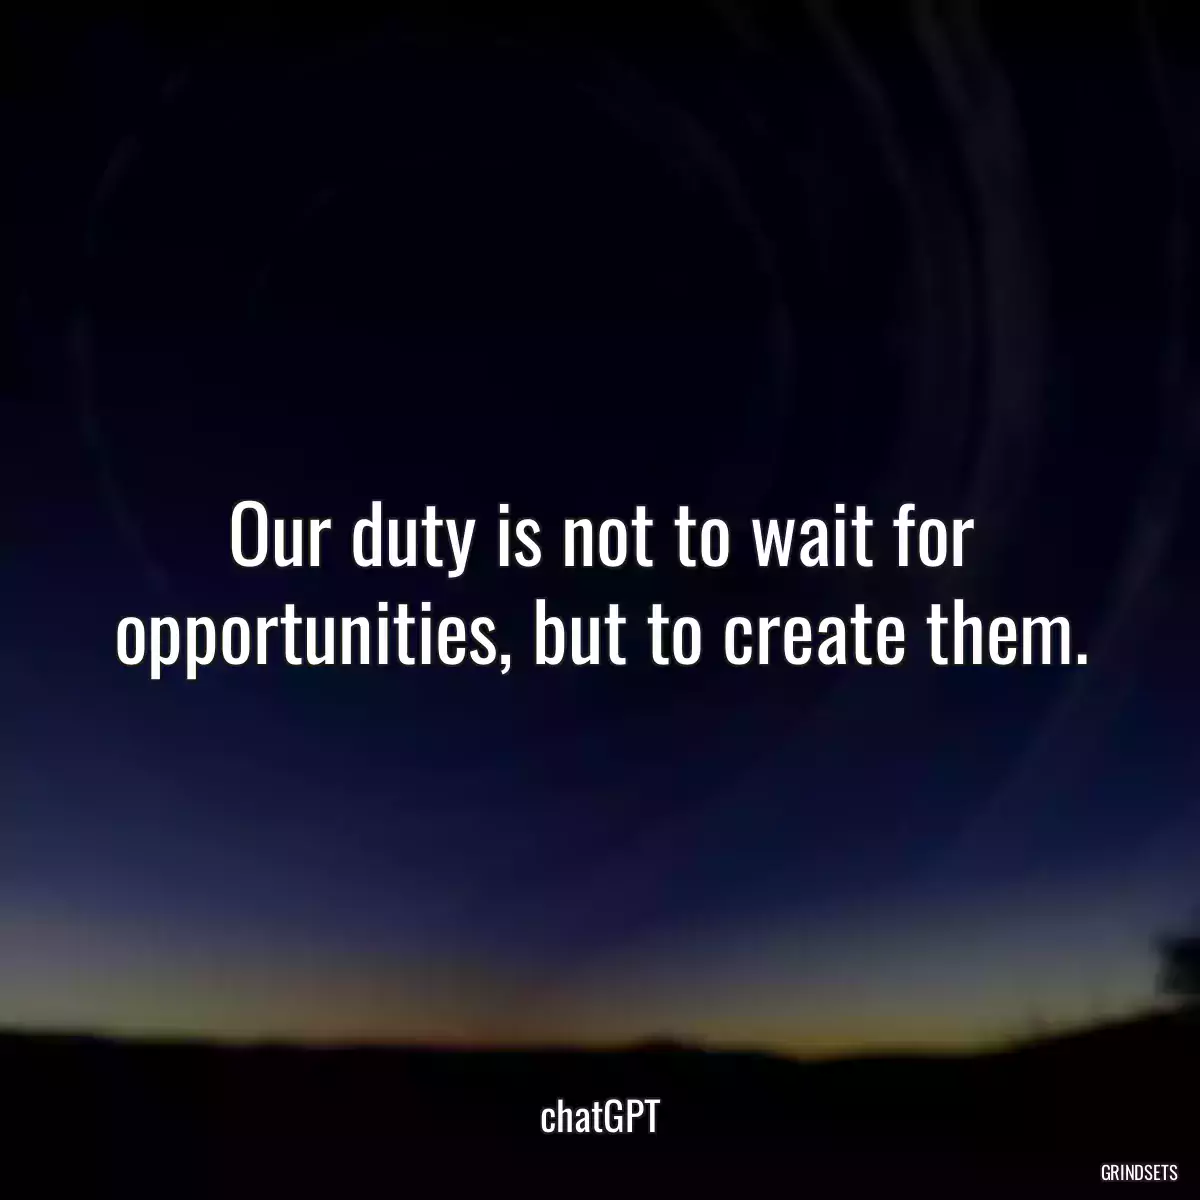 Our duty is not to wait for opportunities, but to create them.